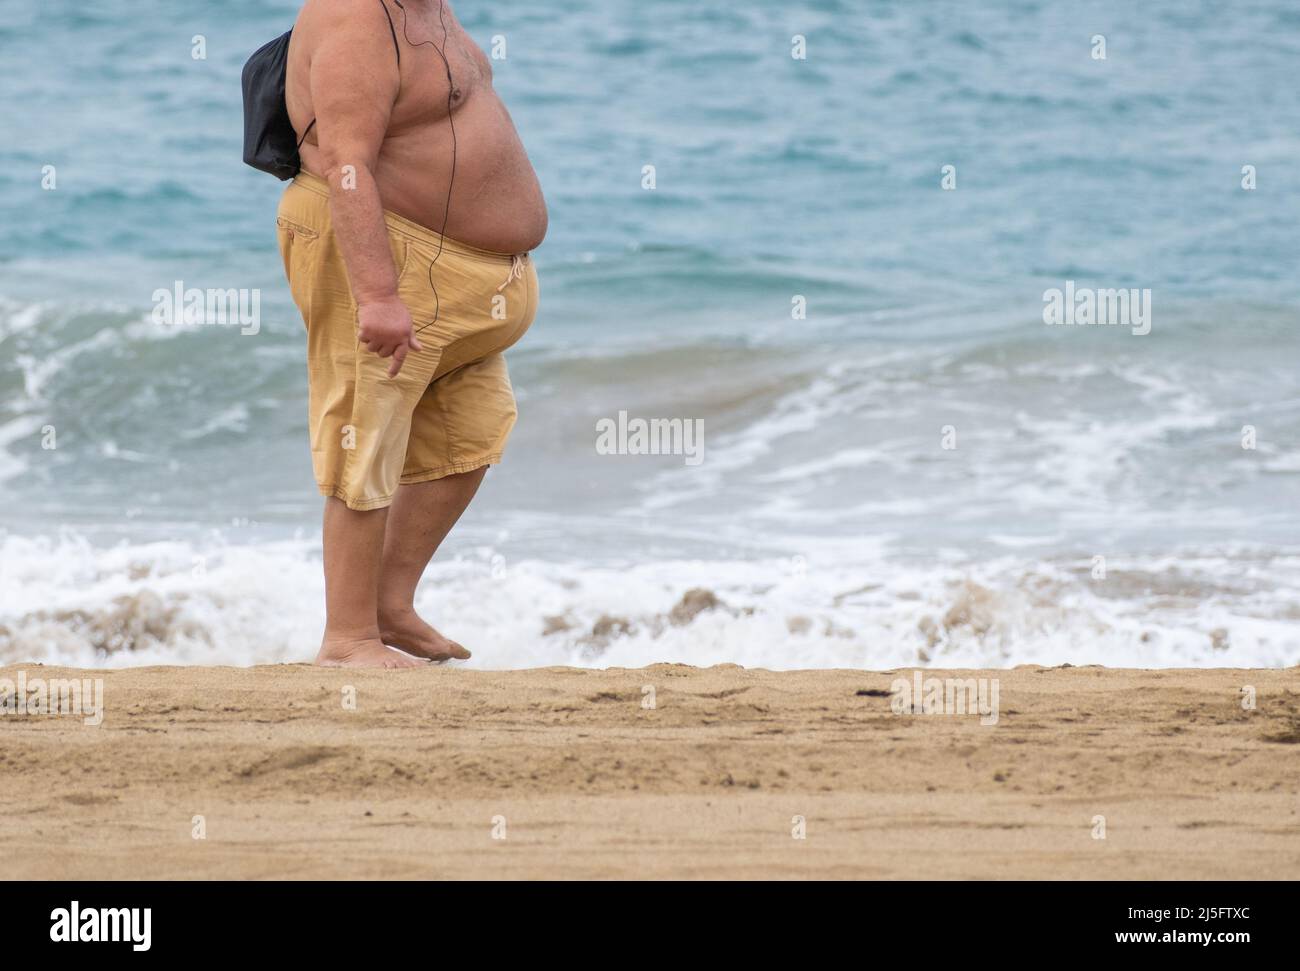 Overweight, obese man walking on beach. Stock Photo